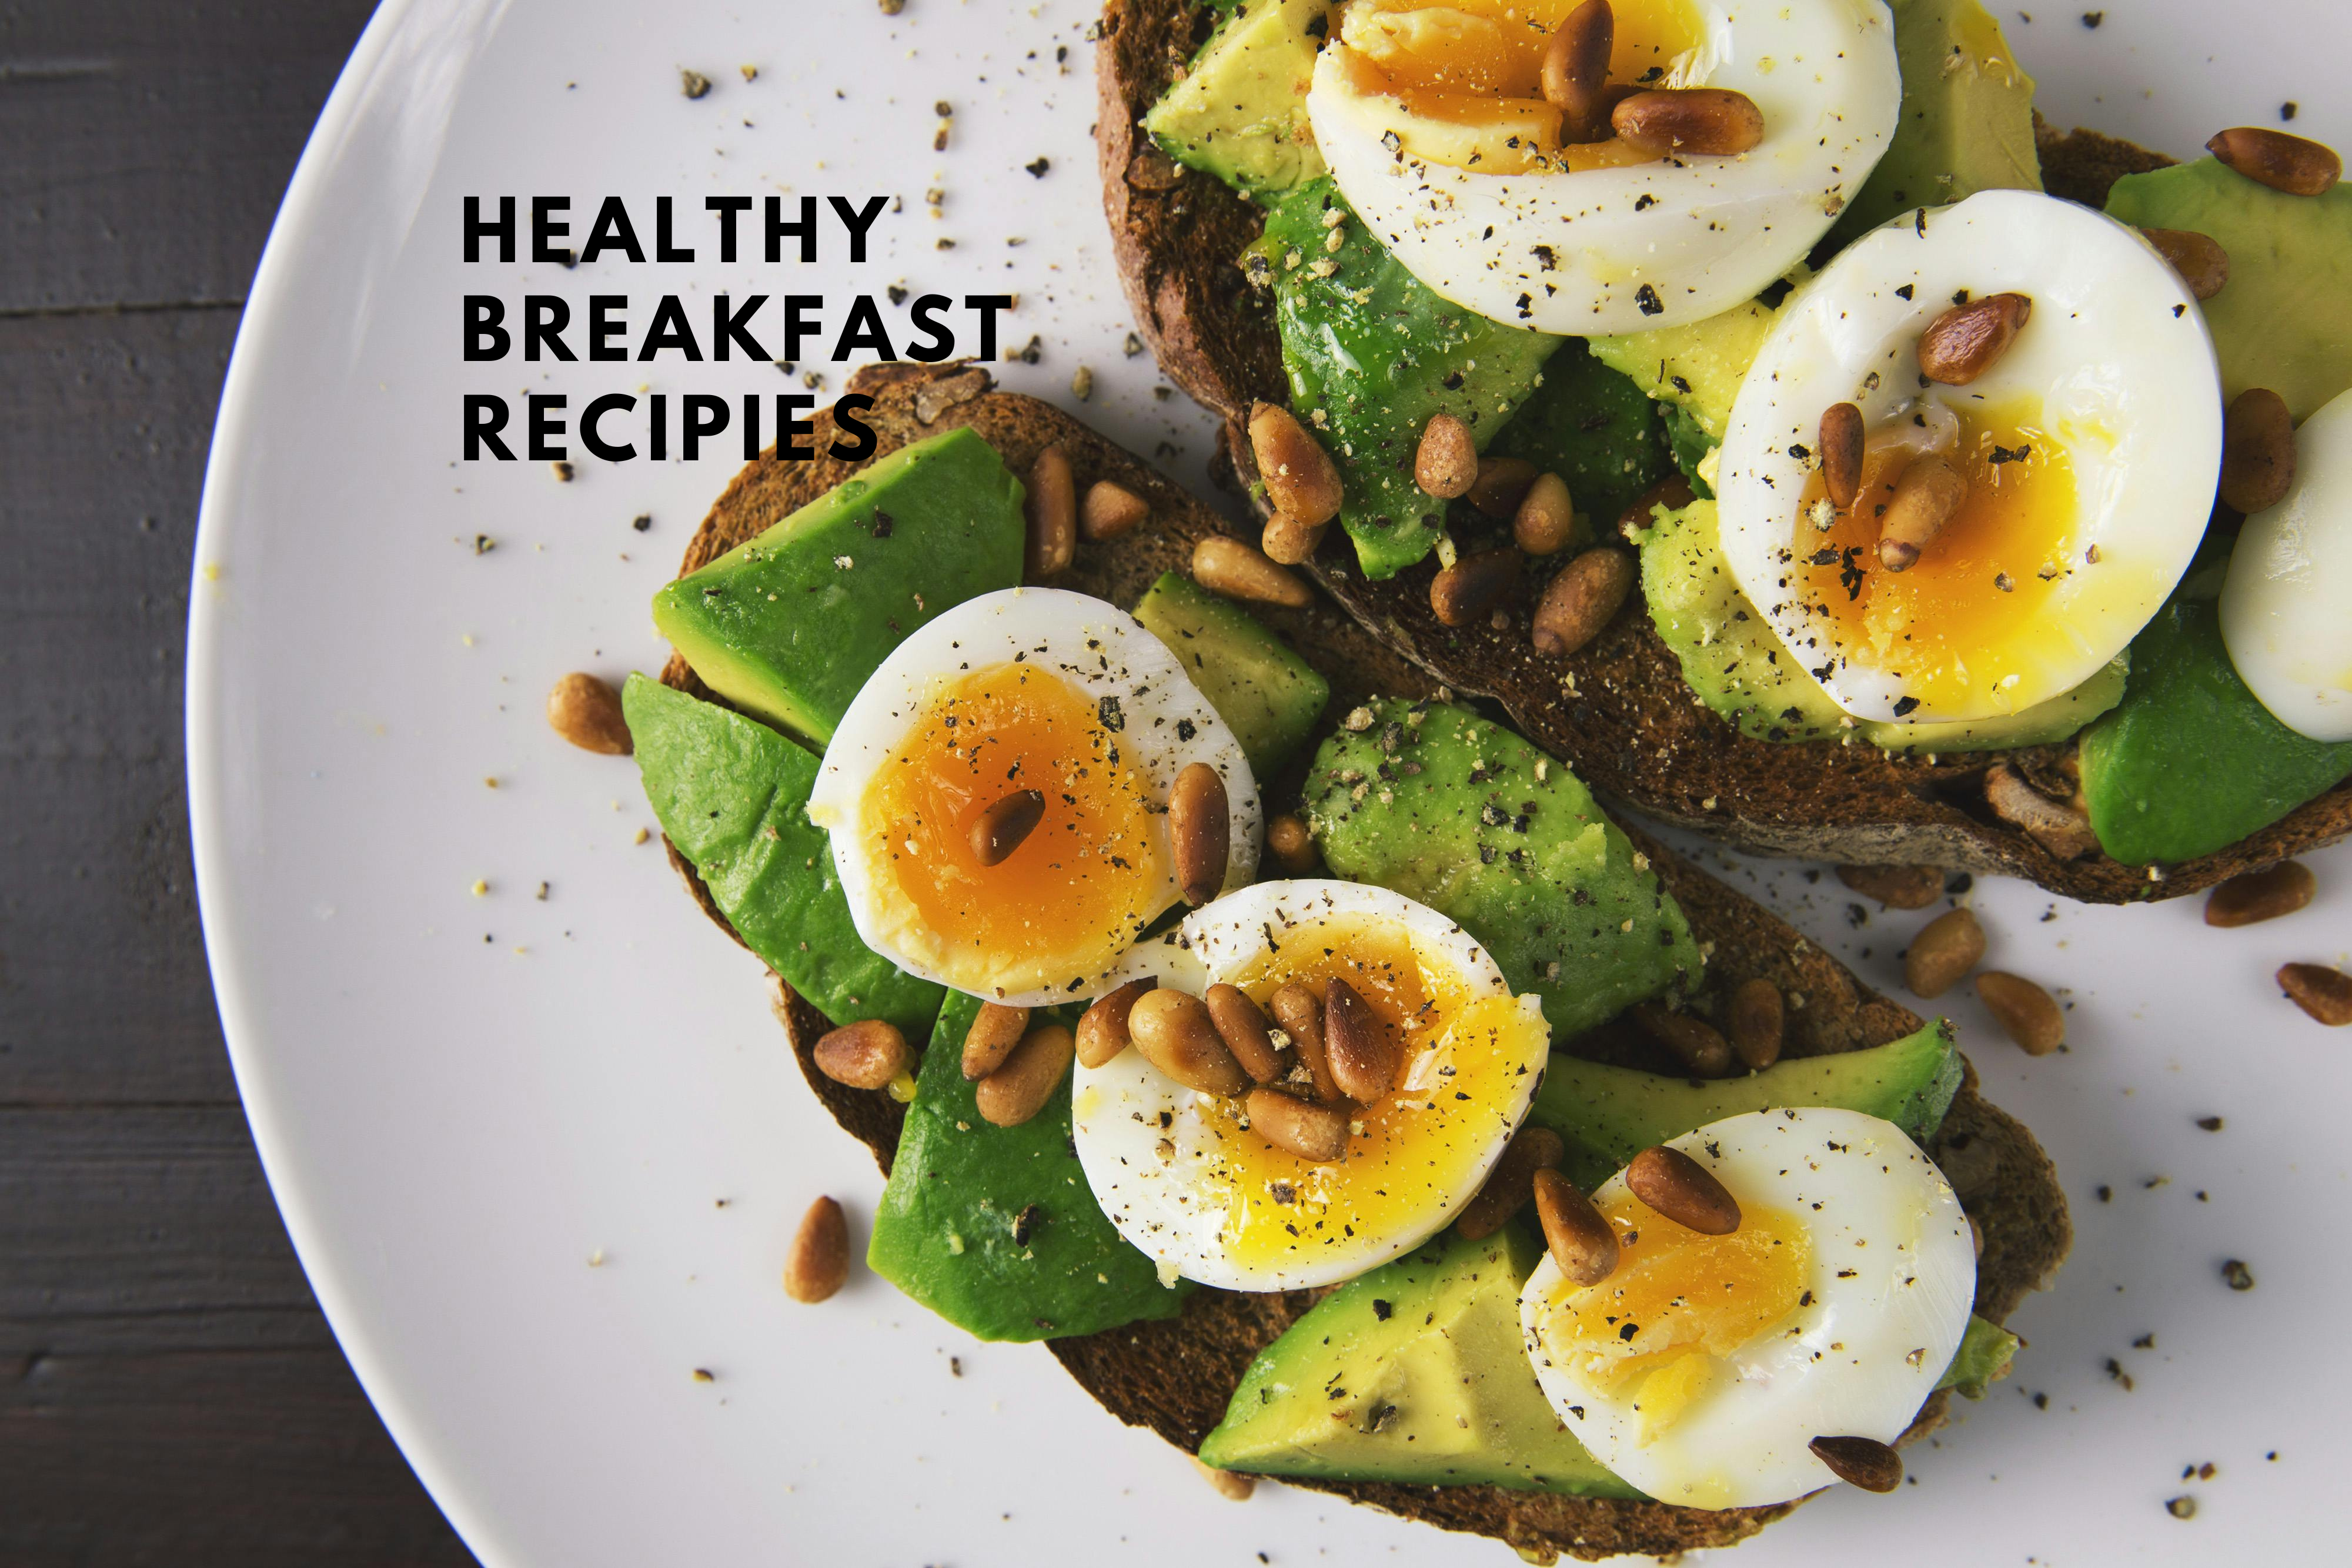 Healthy Breakfast Ideas for a Nutritious Start to Your Day